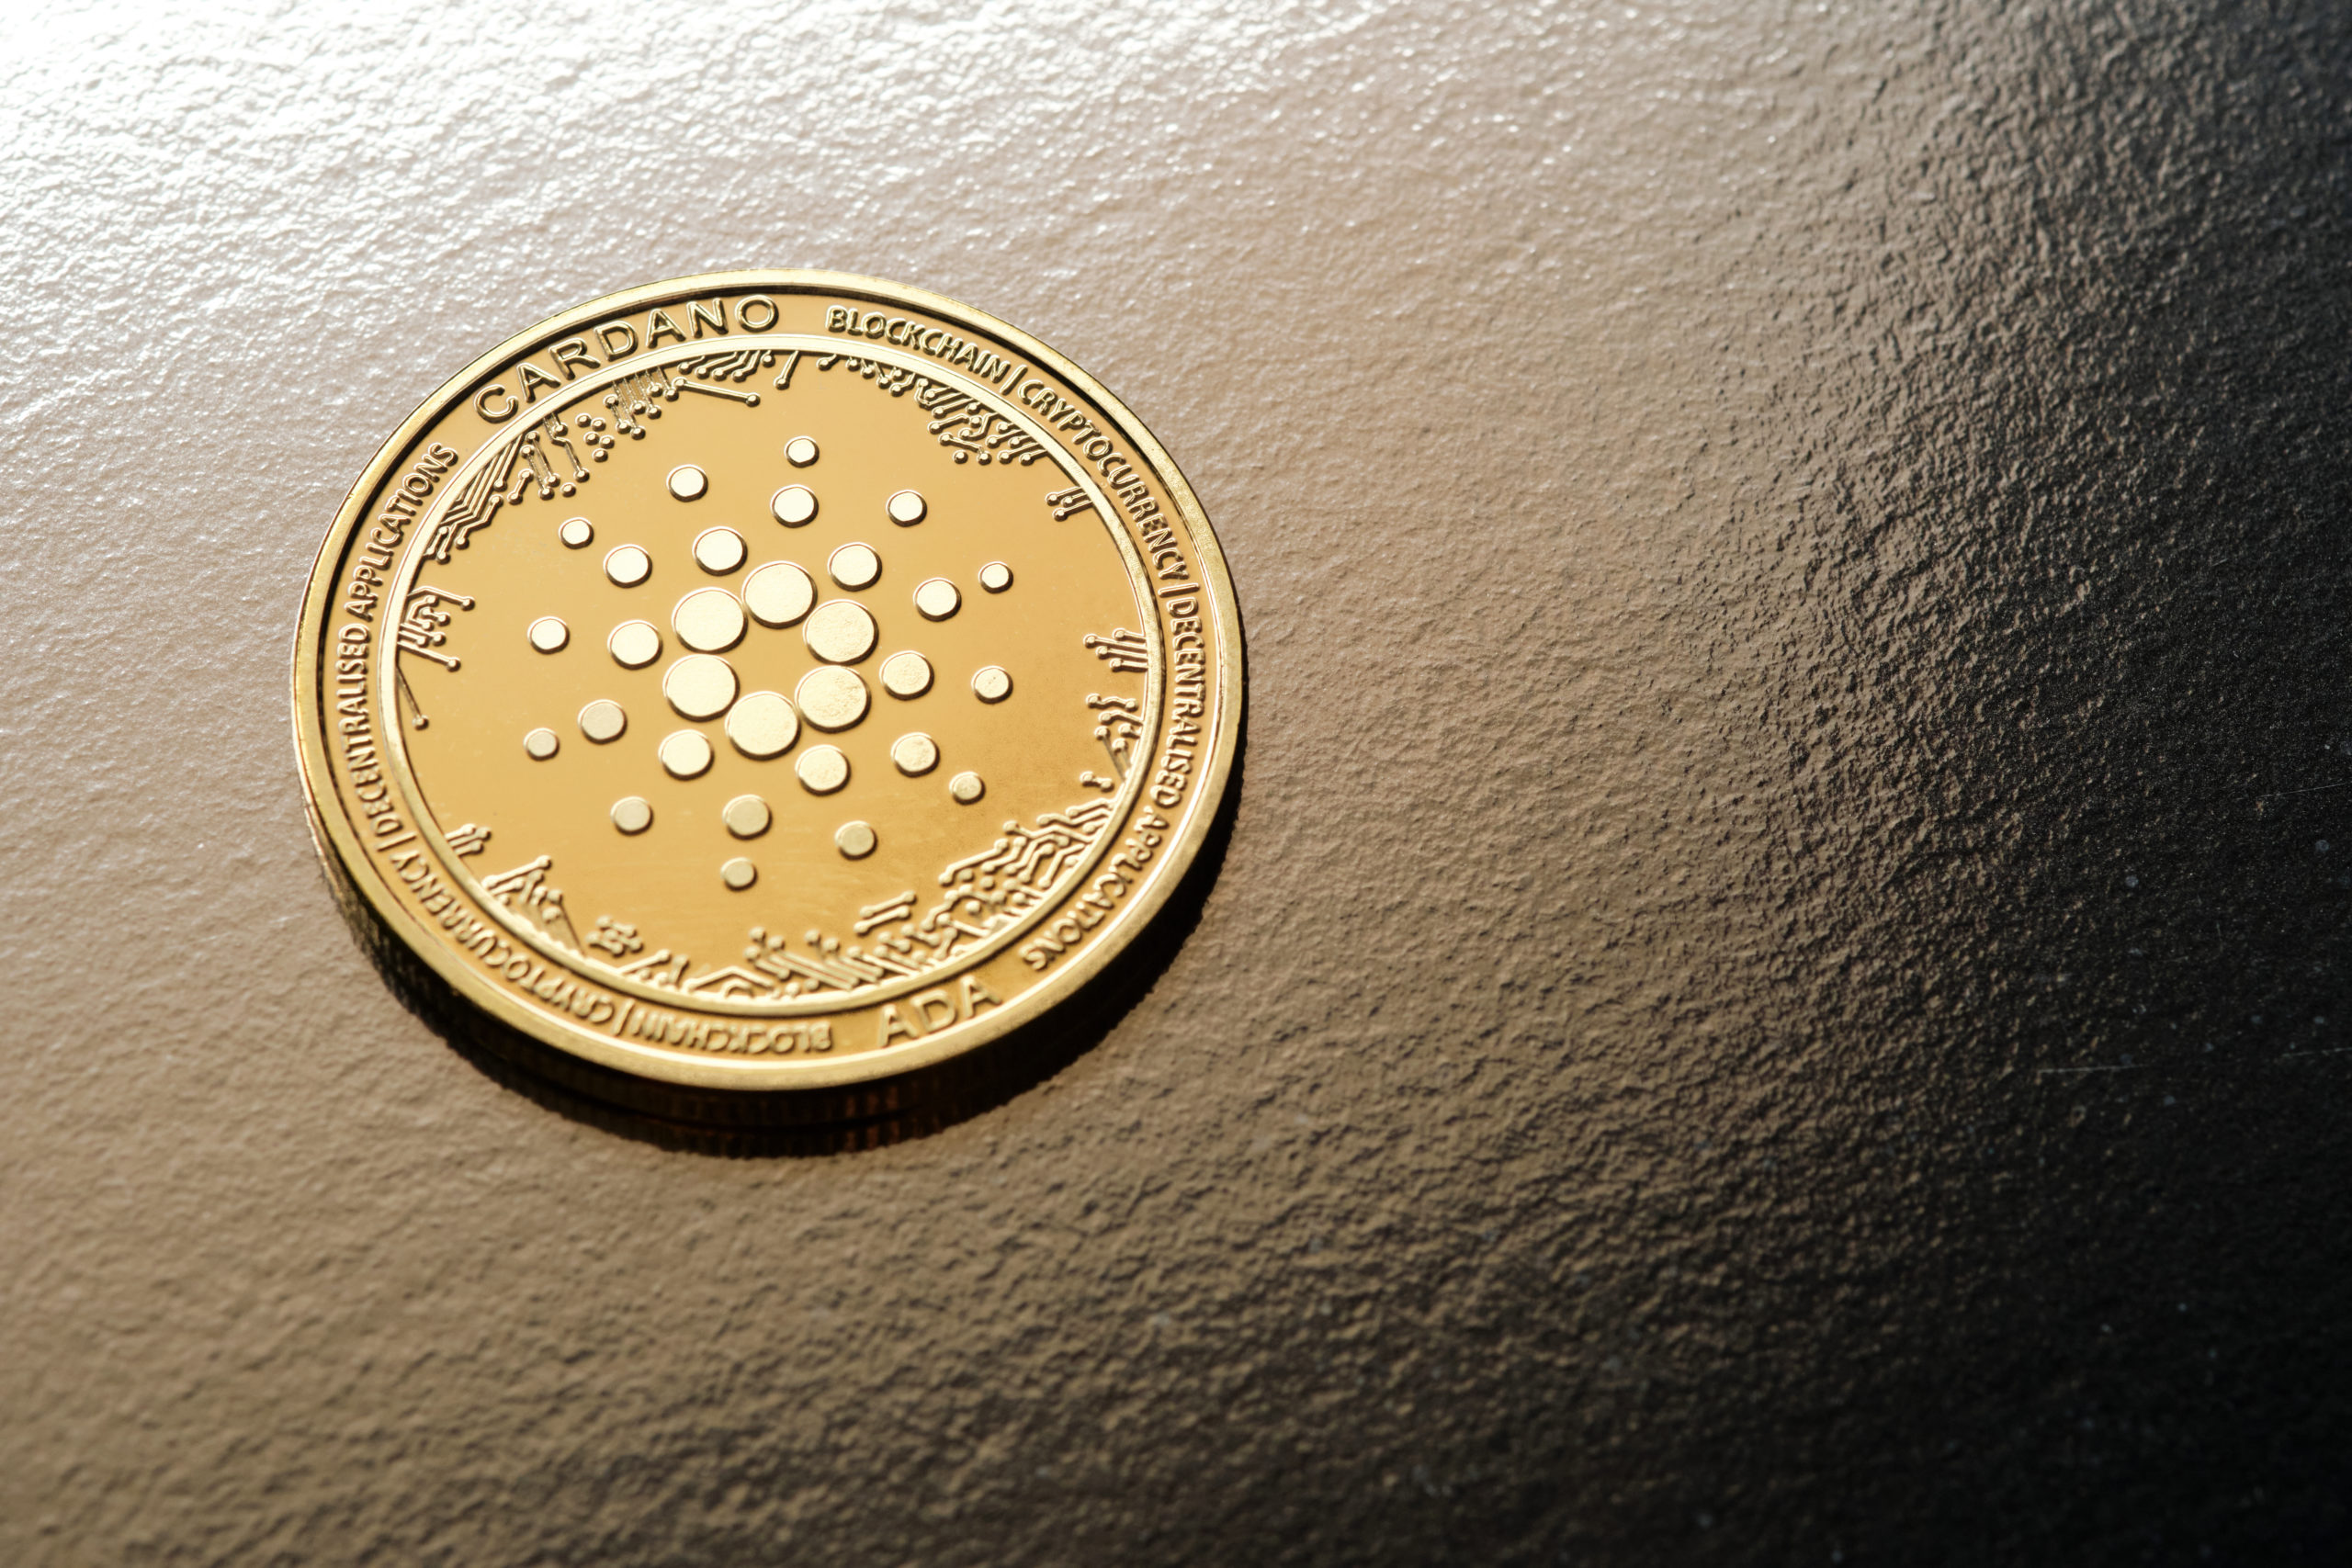 Cardano Founder Excited as First Round of Testing on Cardano Vasil Node Occurs